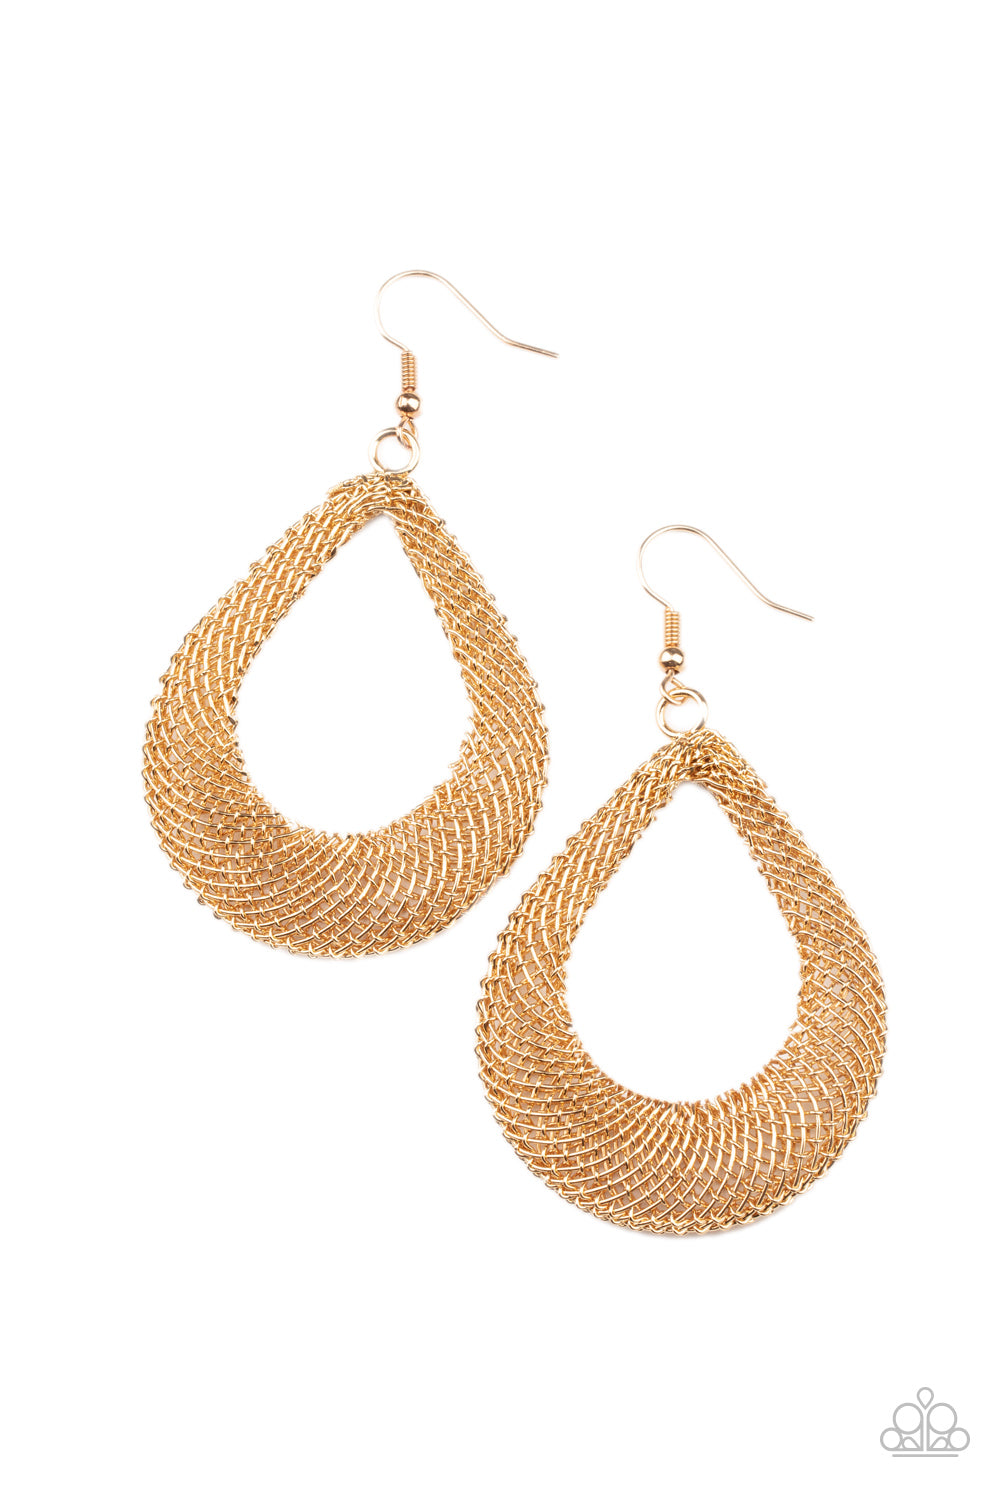 five-dollar-jewelry-a-hot-mesh-gold-earrings-paparazzi-accessories